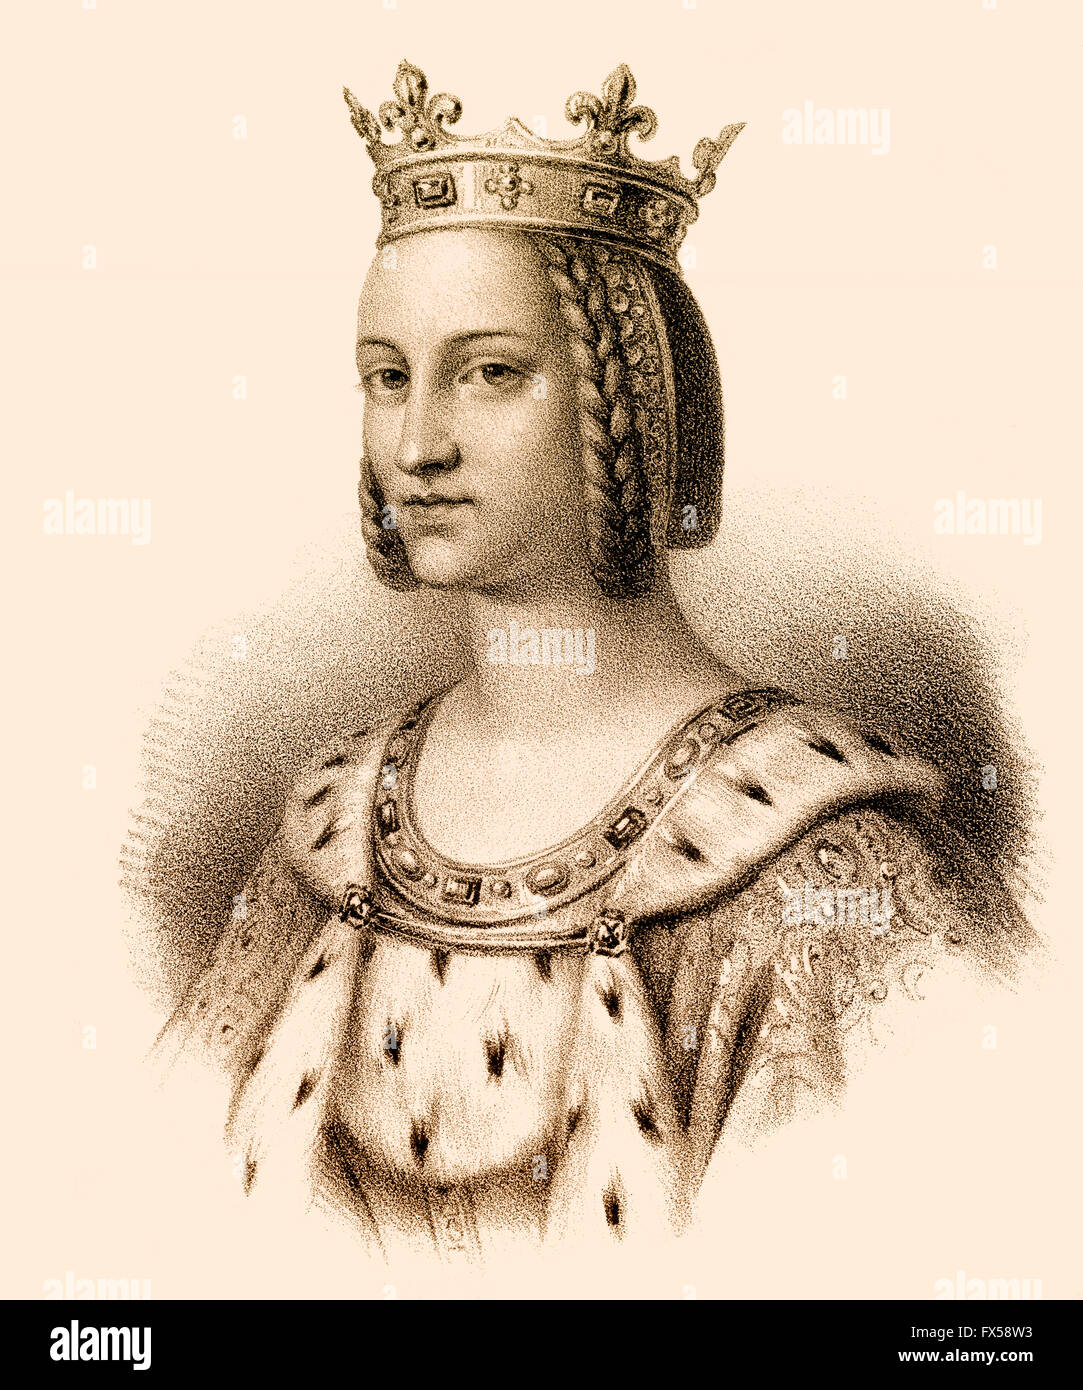 Charlotte of Savoy, Charlotte de Savoie, 1441-1483, queen of France as the second wife of Louis XI. Stock Photo